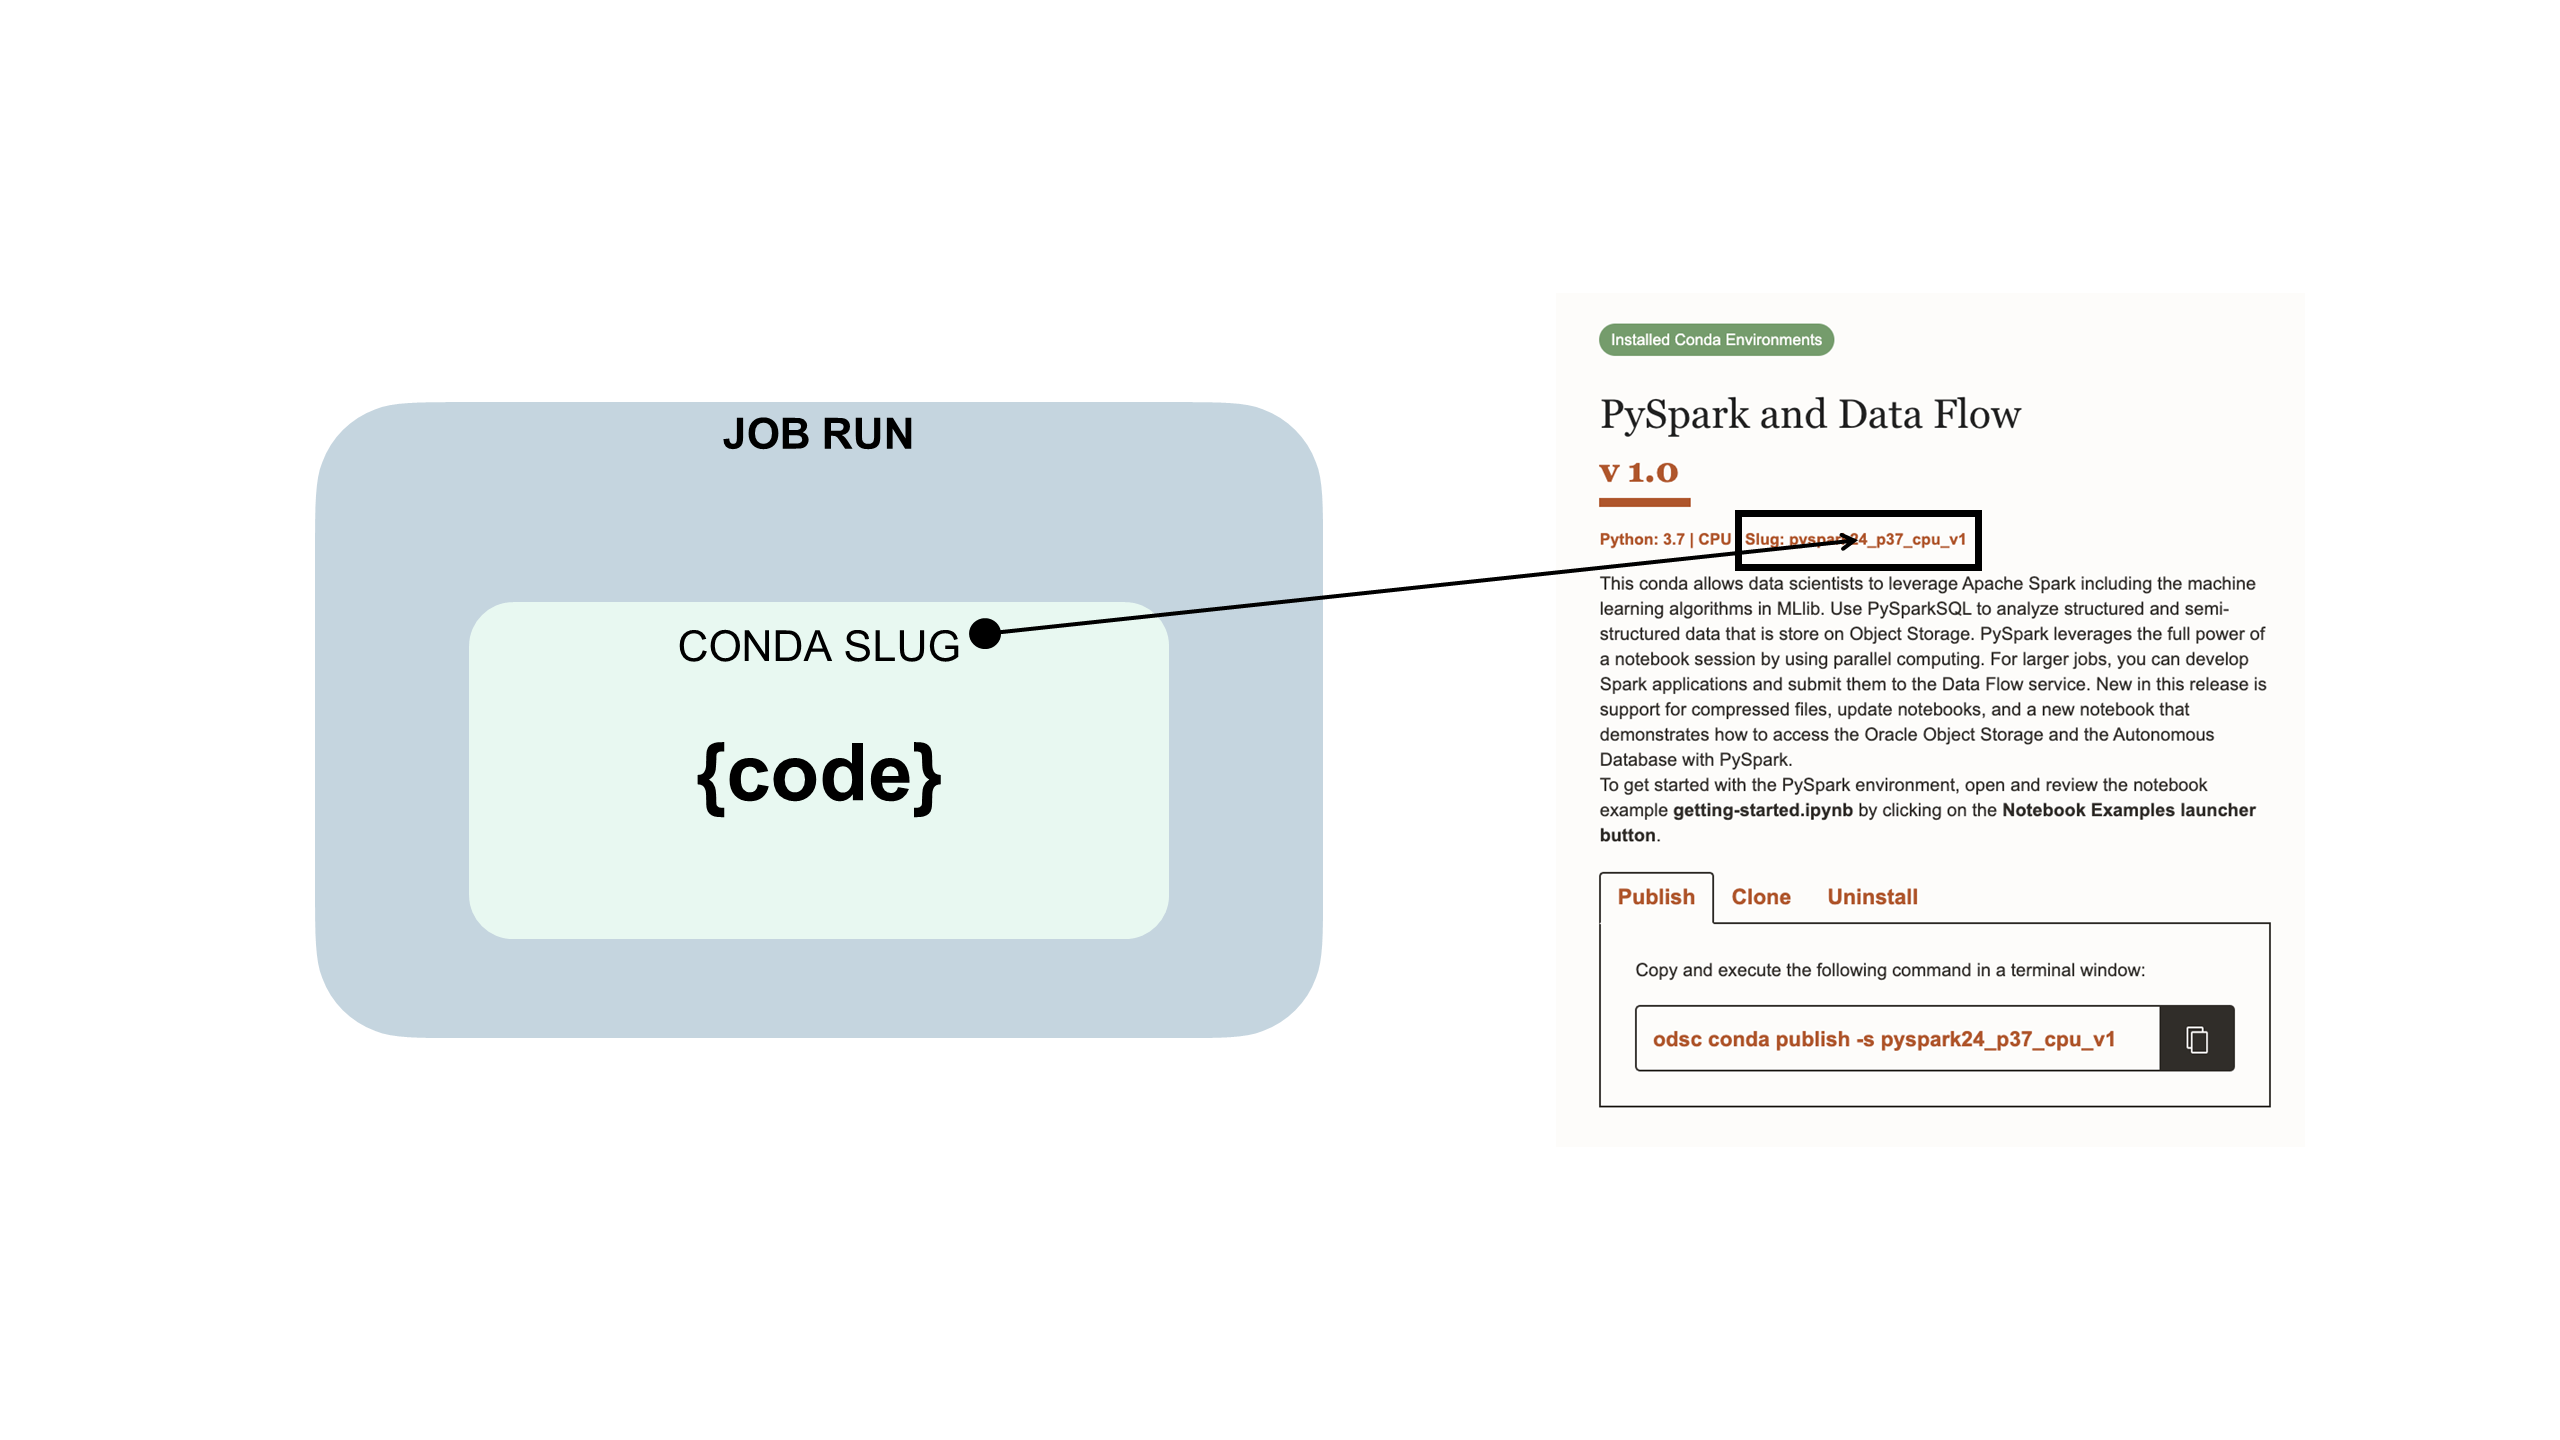 Shows how job code is embedded in a Data Science conda, shape, and job run. And the conda slug in the conda card.